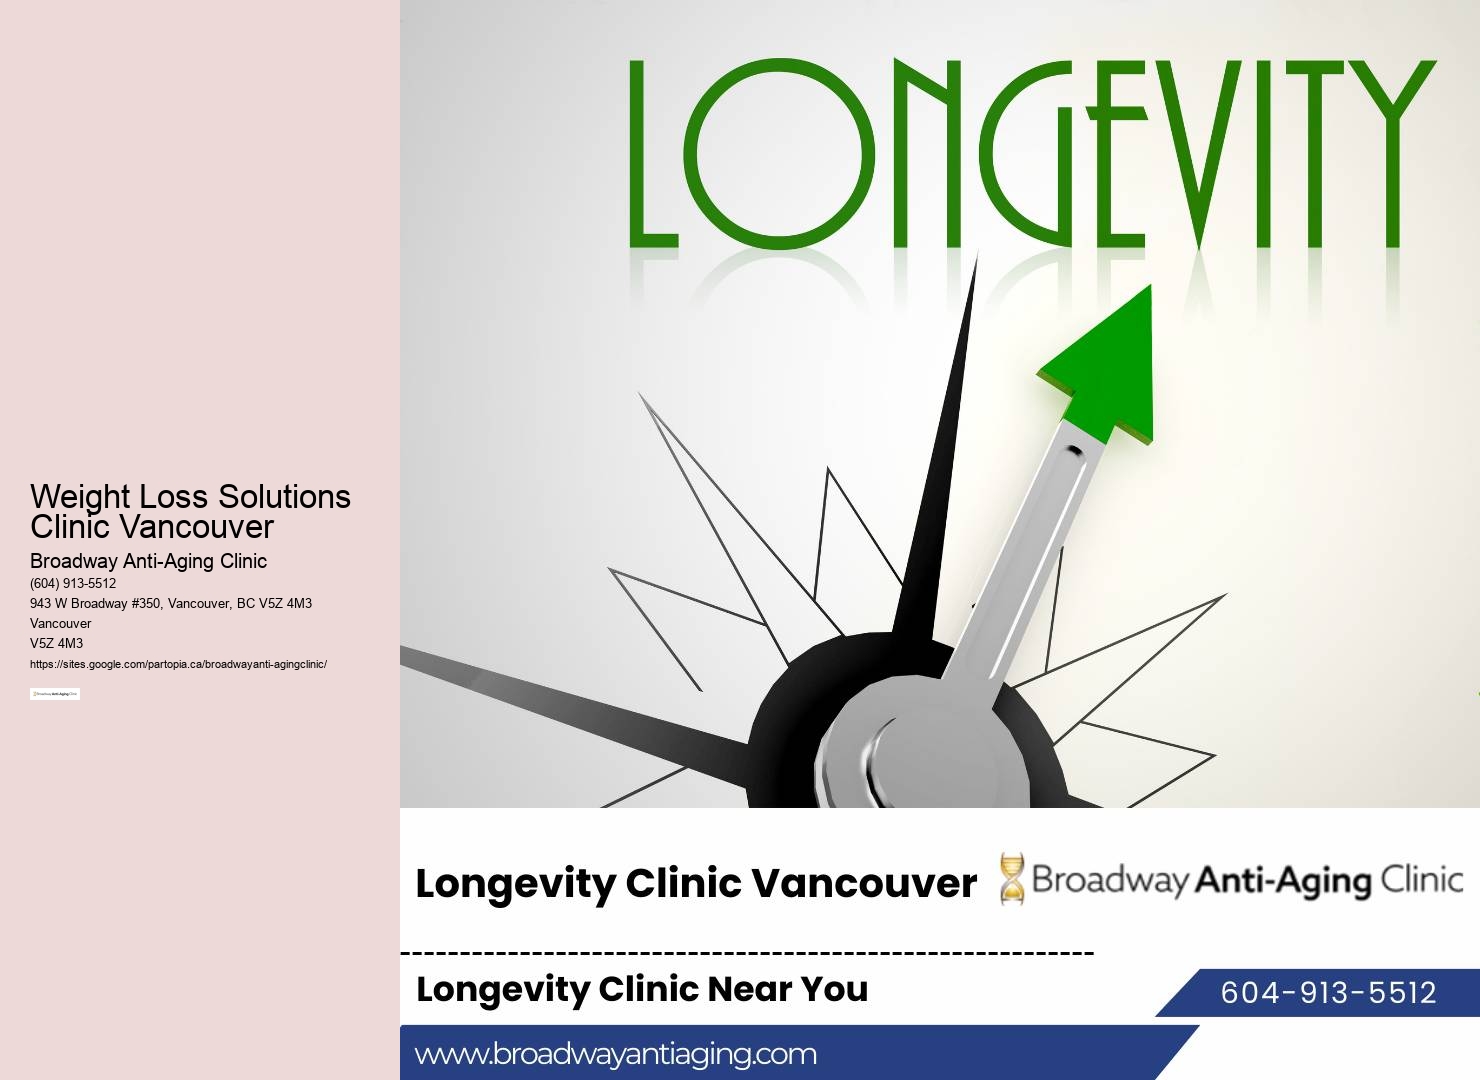 Weight loss clinic Vancouver local